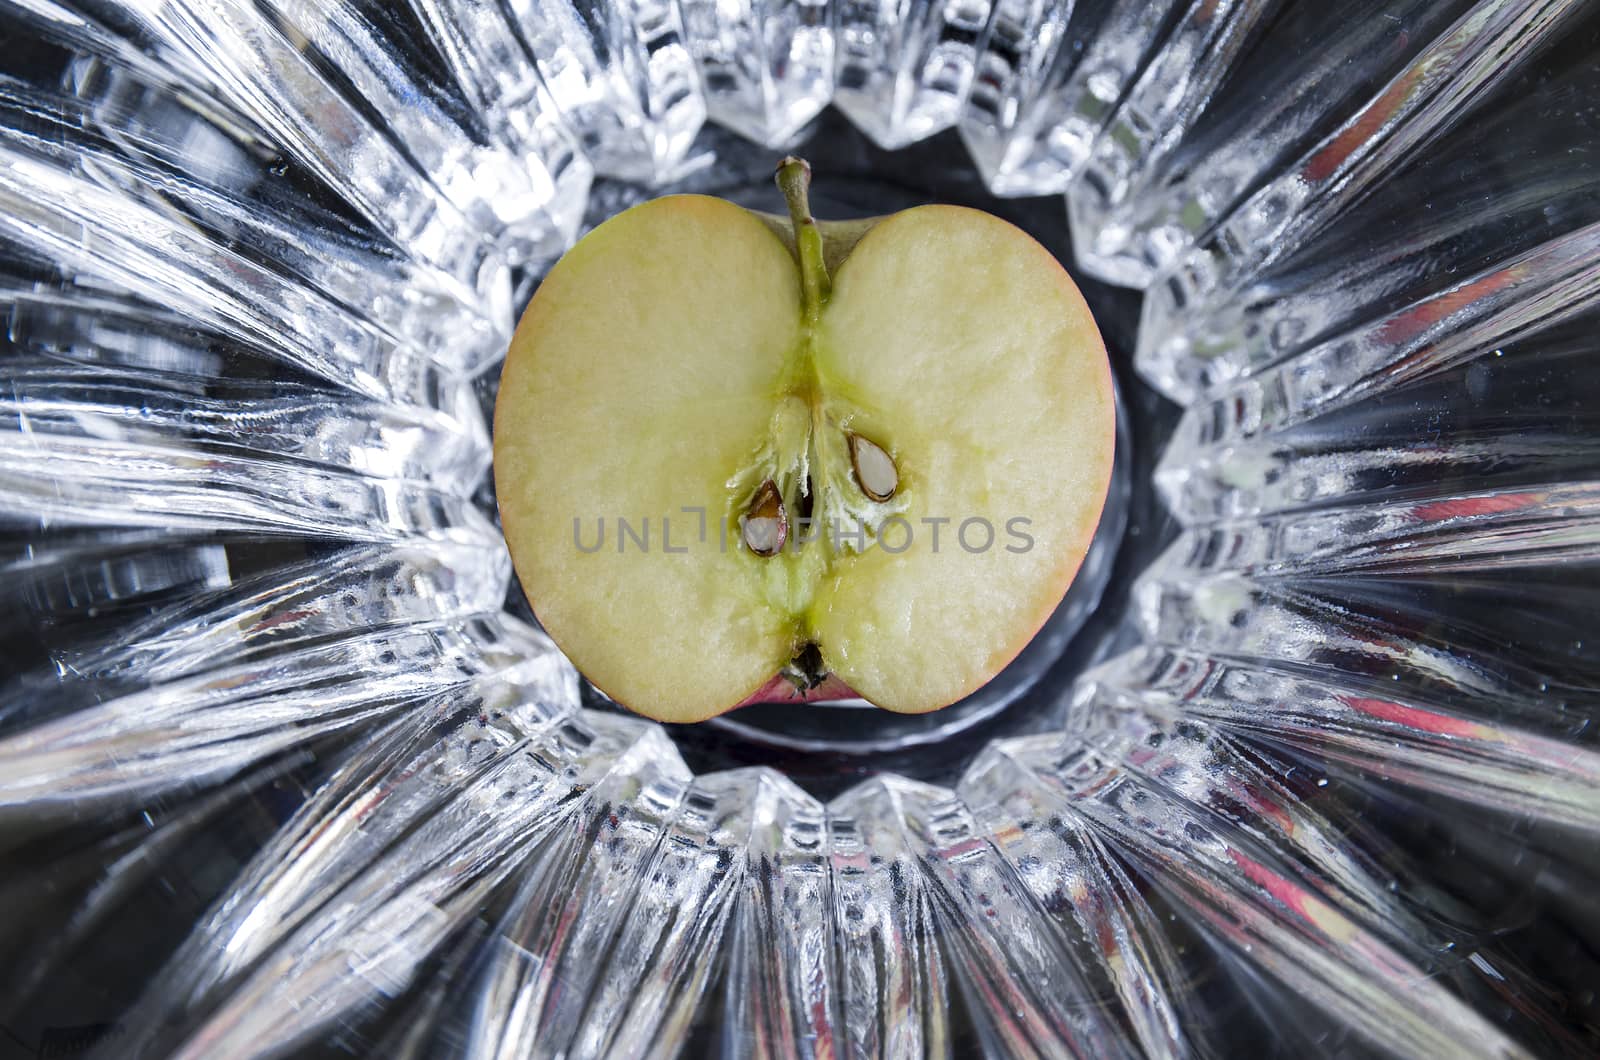 Sectioned fruit: apple half